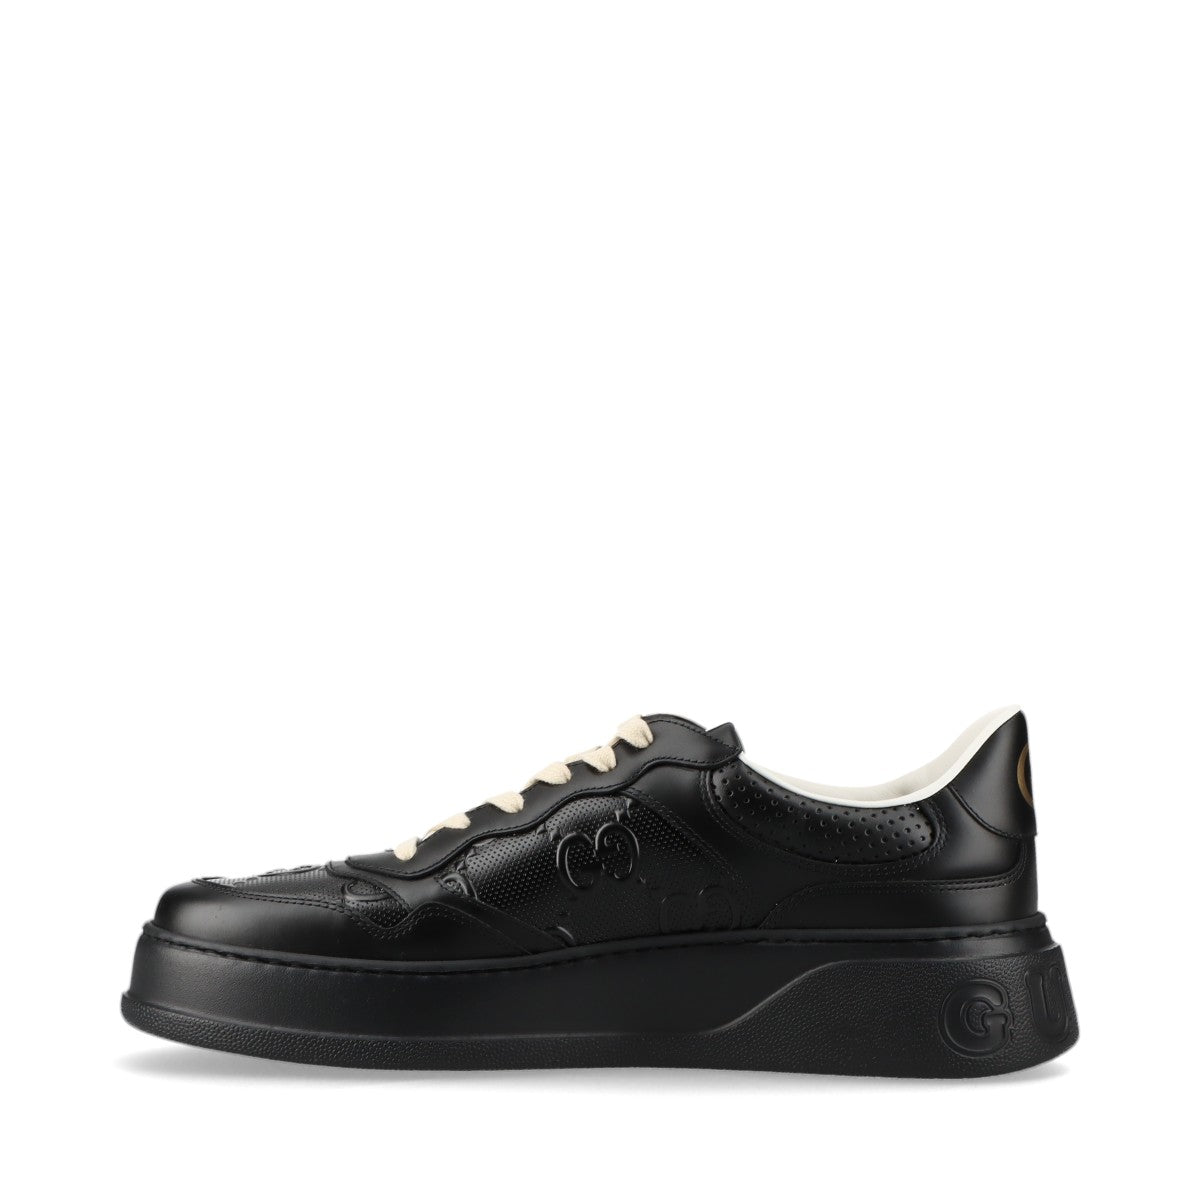 Gucci GG embossed Leather Sneakers 11 Men's Black 669682 GG Supreme Replaceable cord Box There is a storage bag